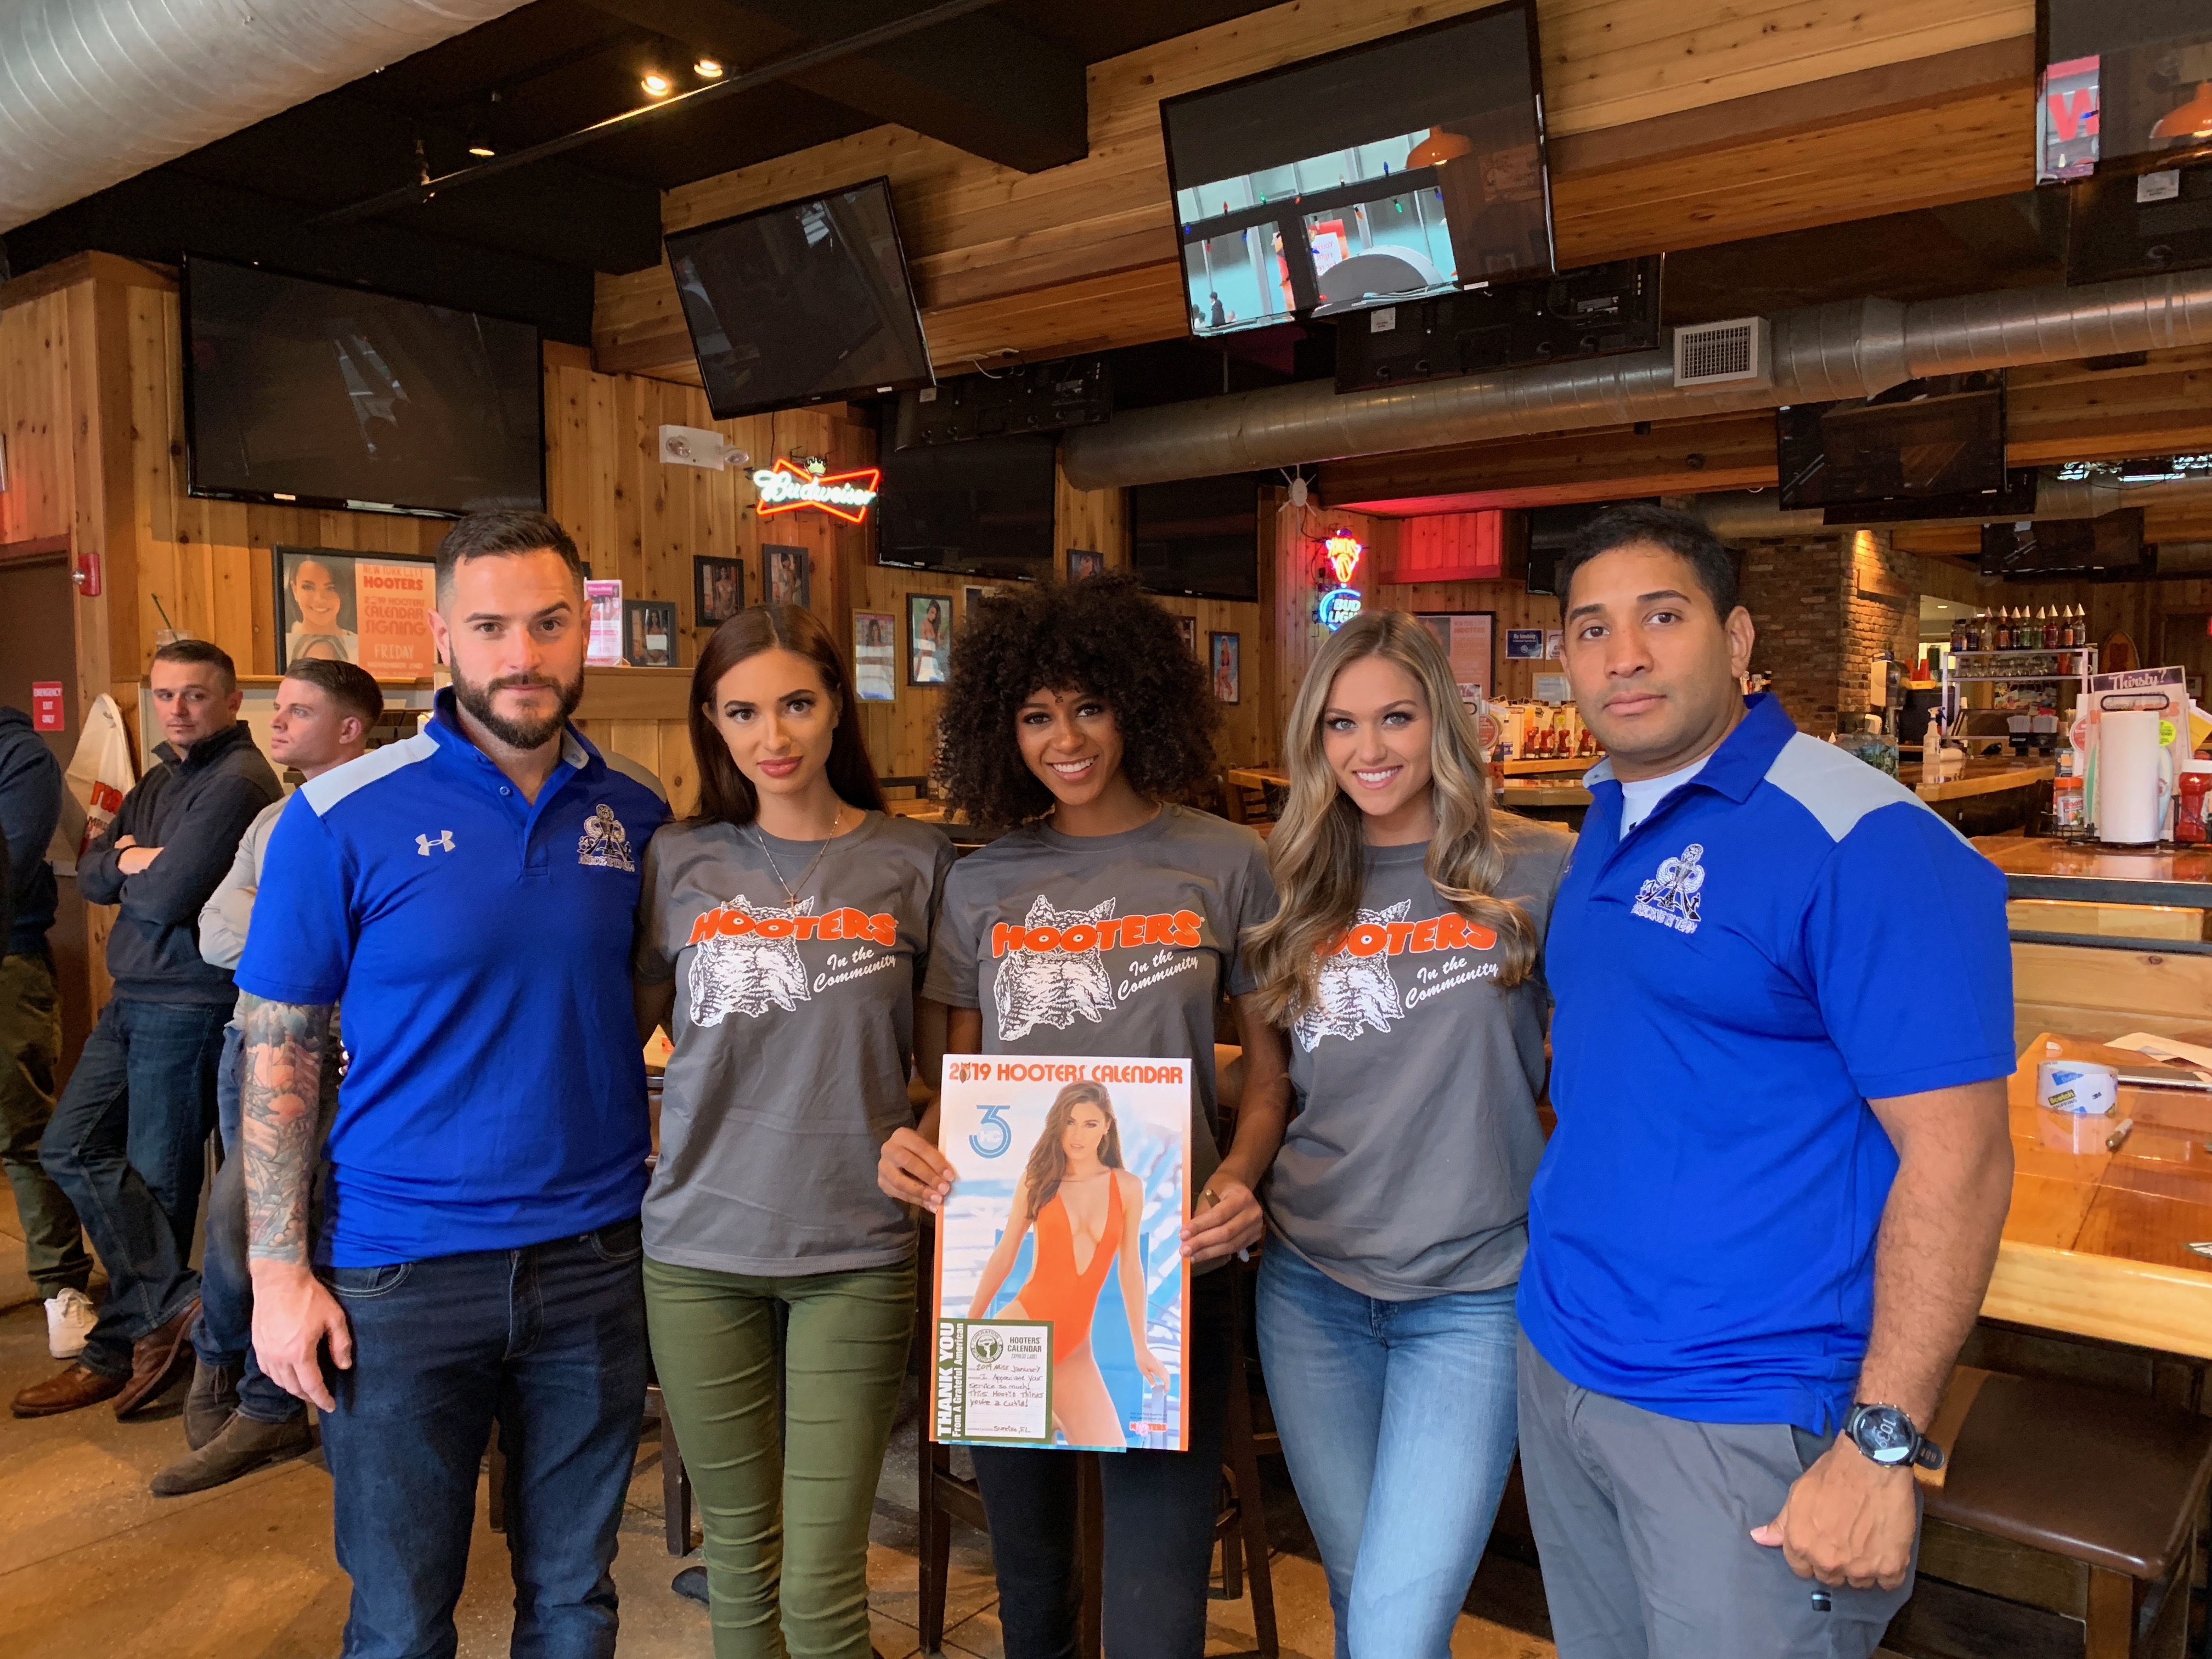 operation-calendar-drop-distributes-hooters-calendars-to-military-all-over-the-world